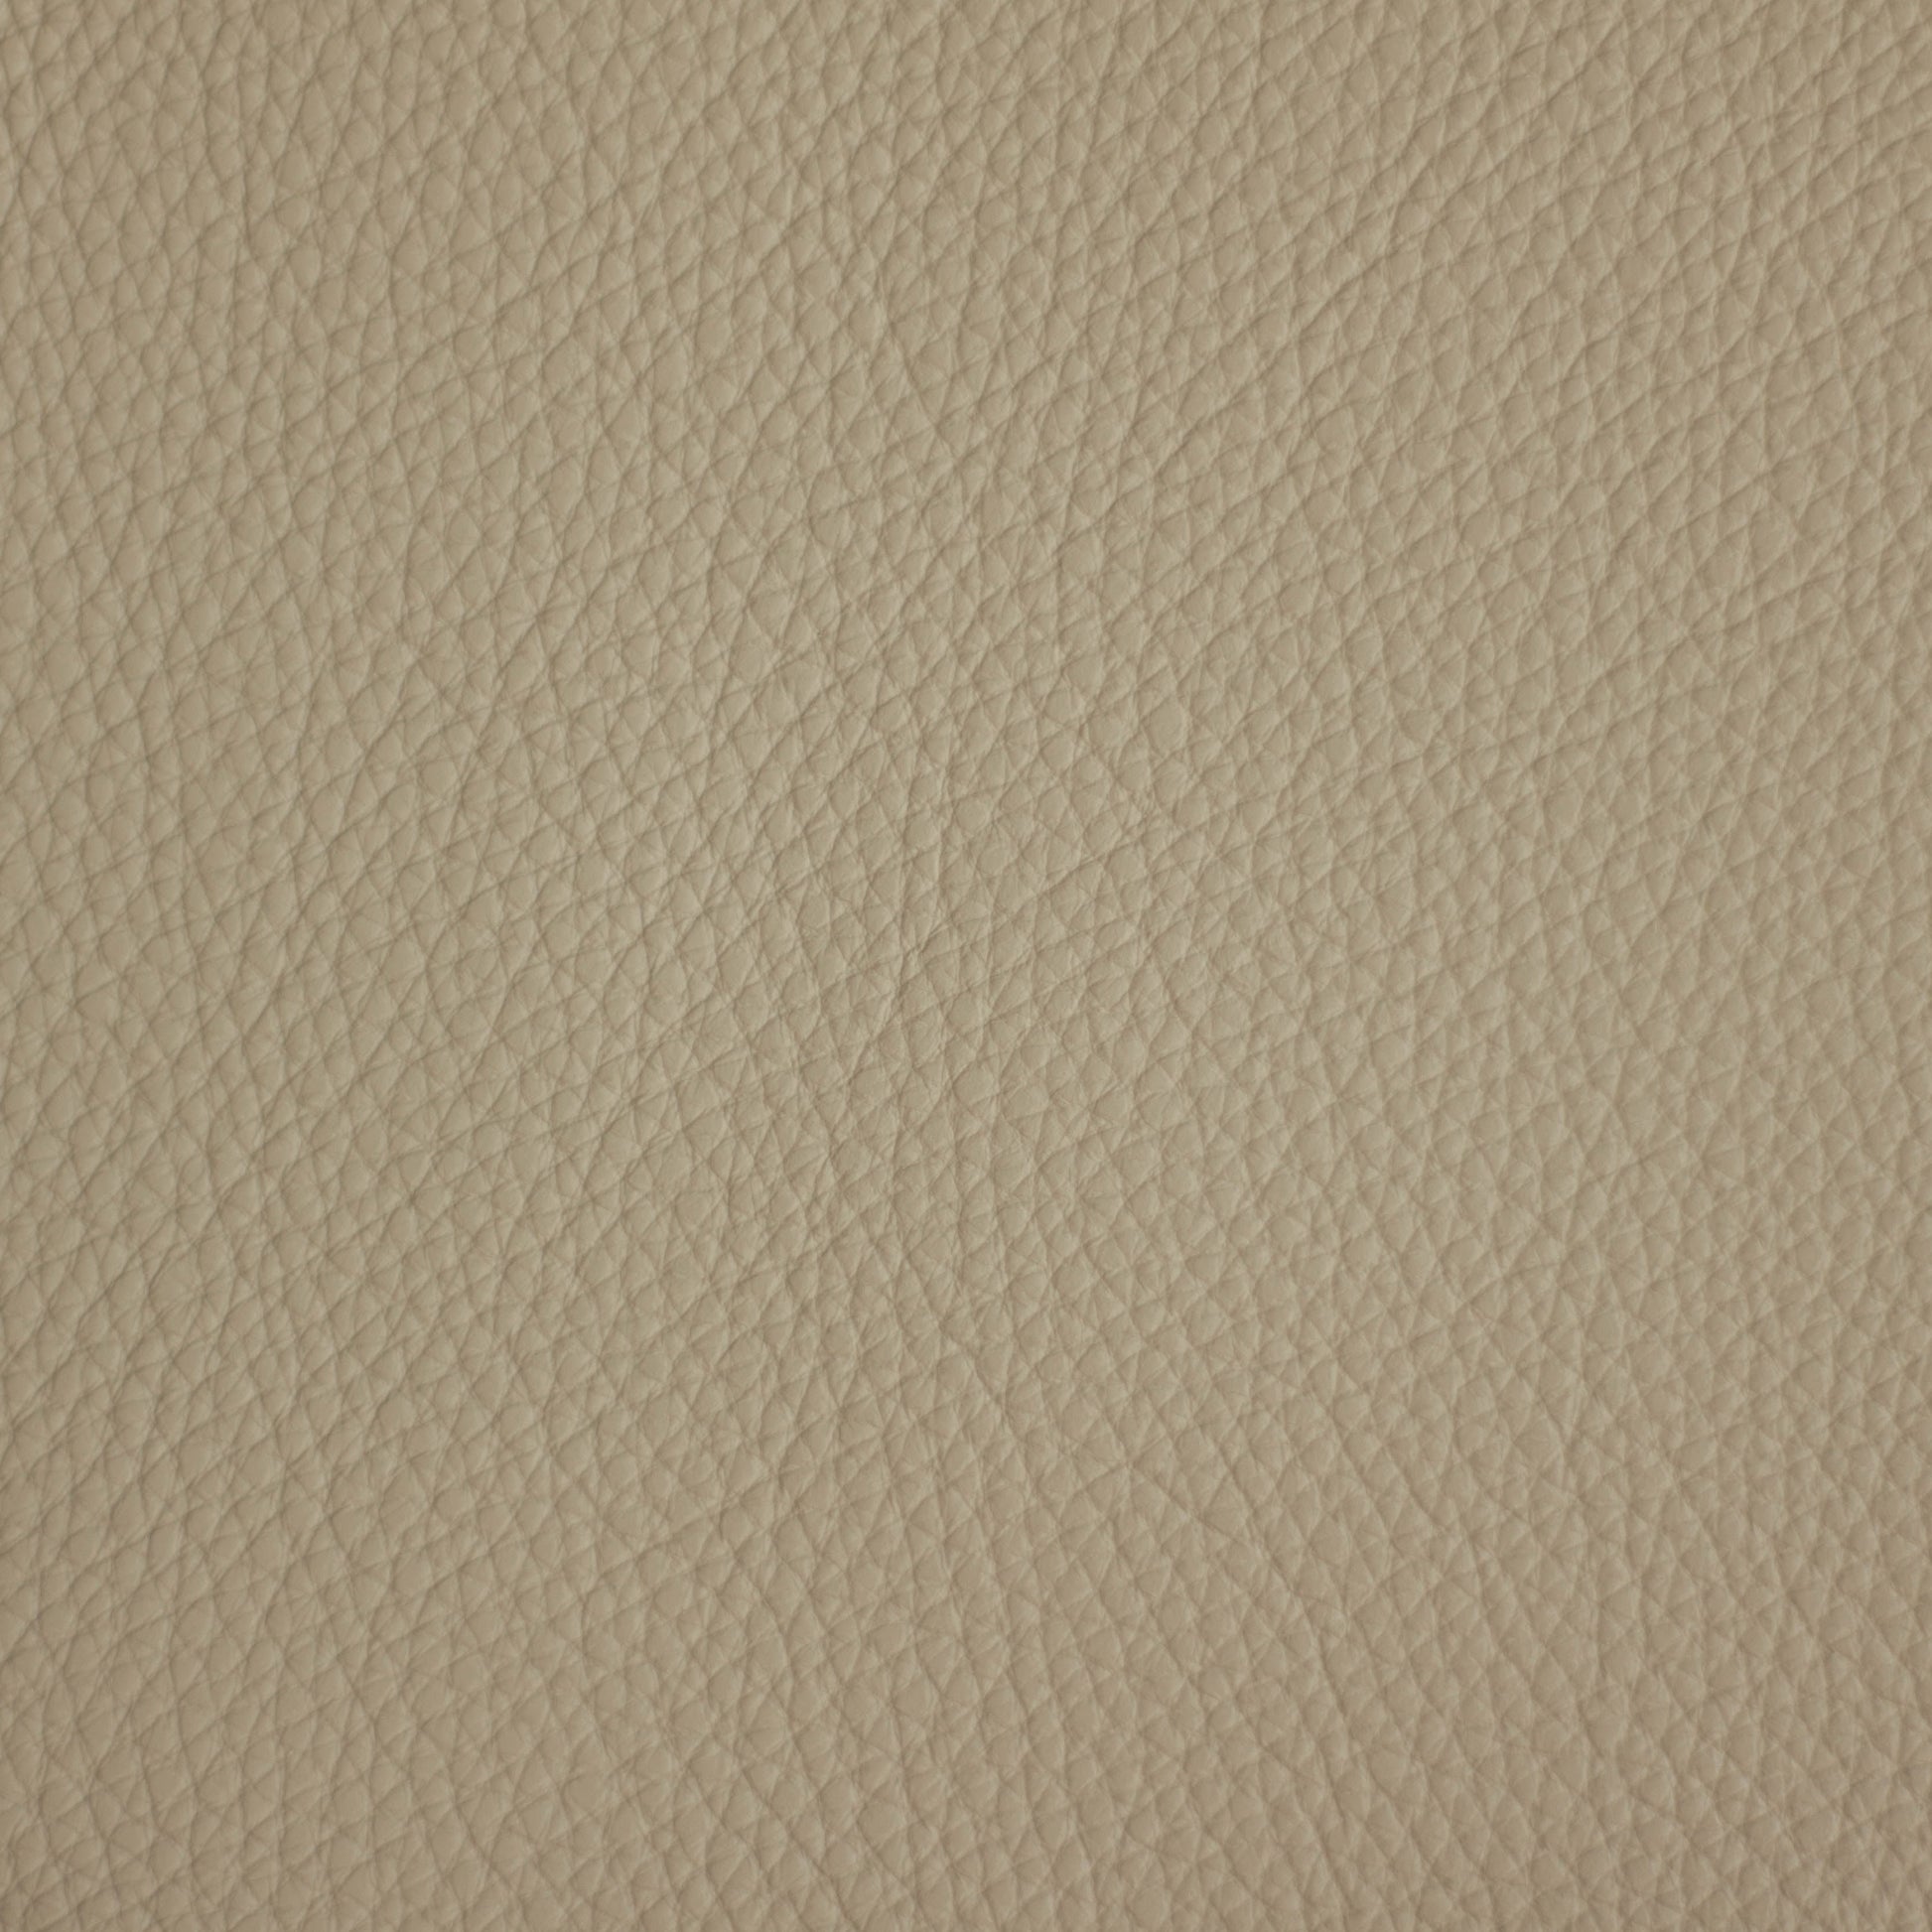 Cityscape, Fawn, Spilltop® Water Resistance, Hospitality Leather Hide